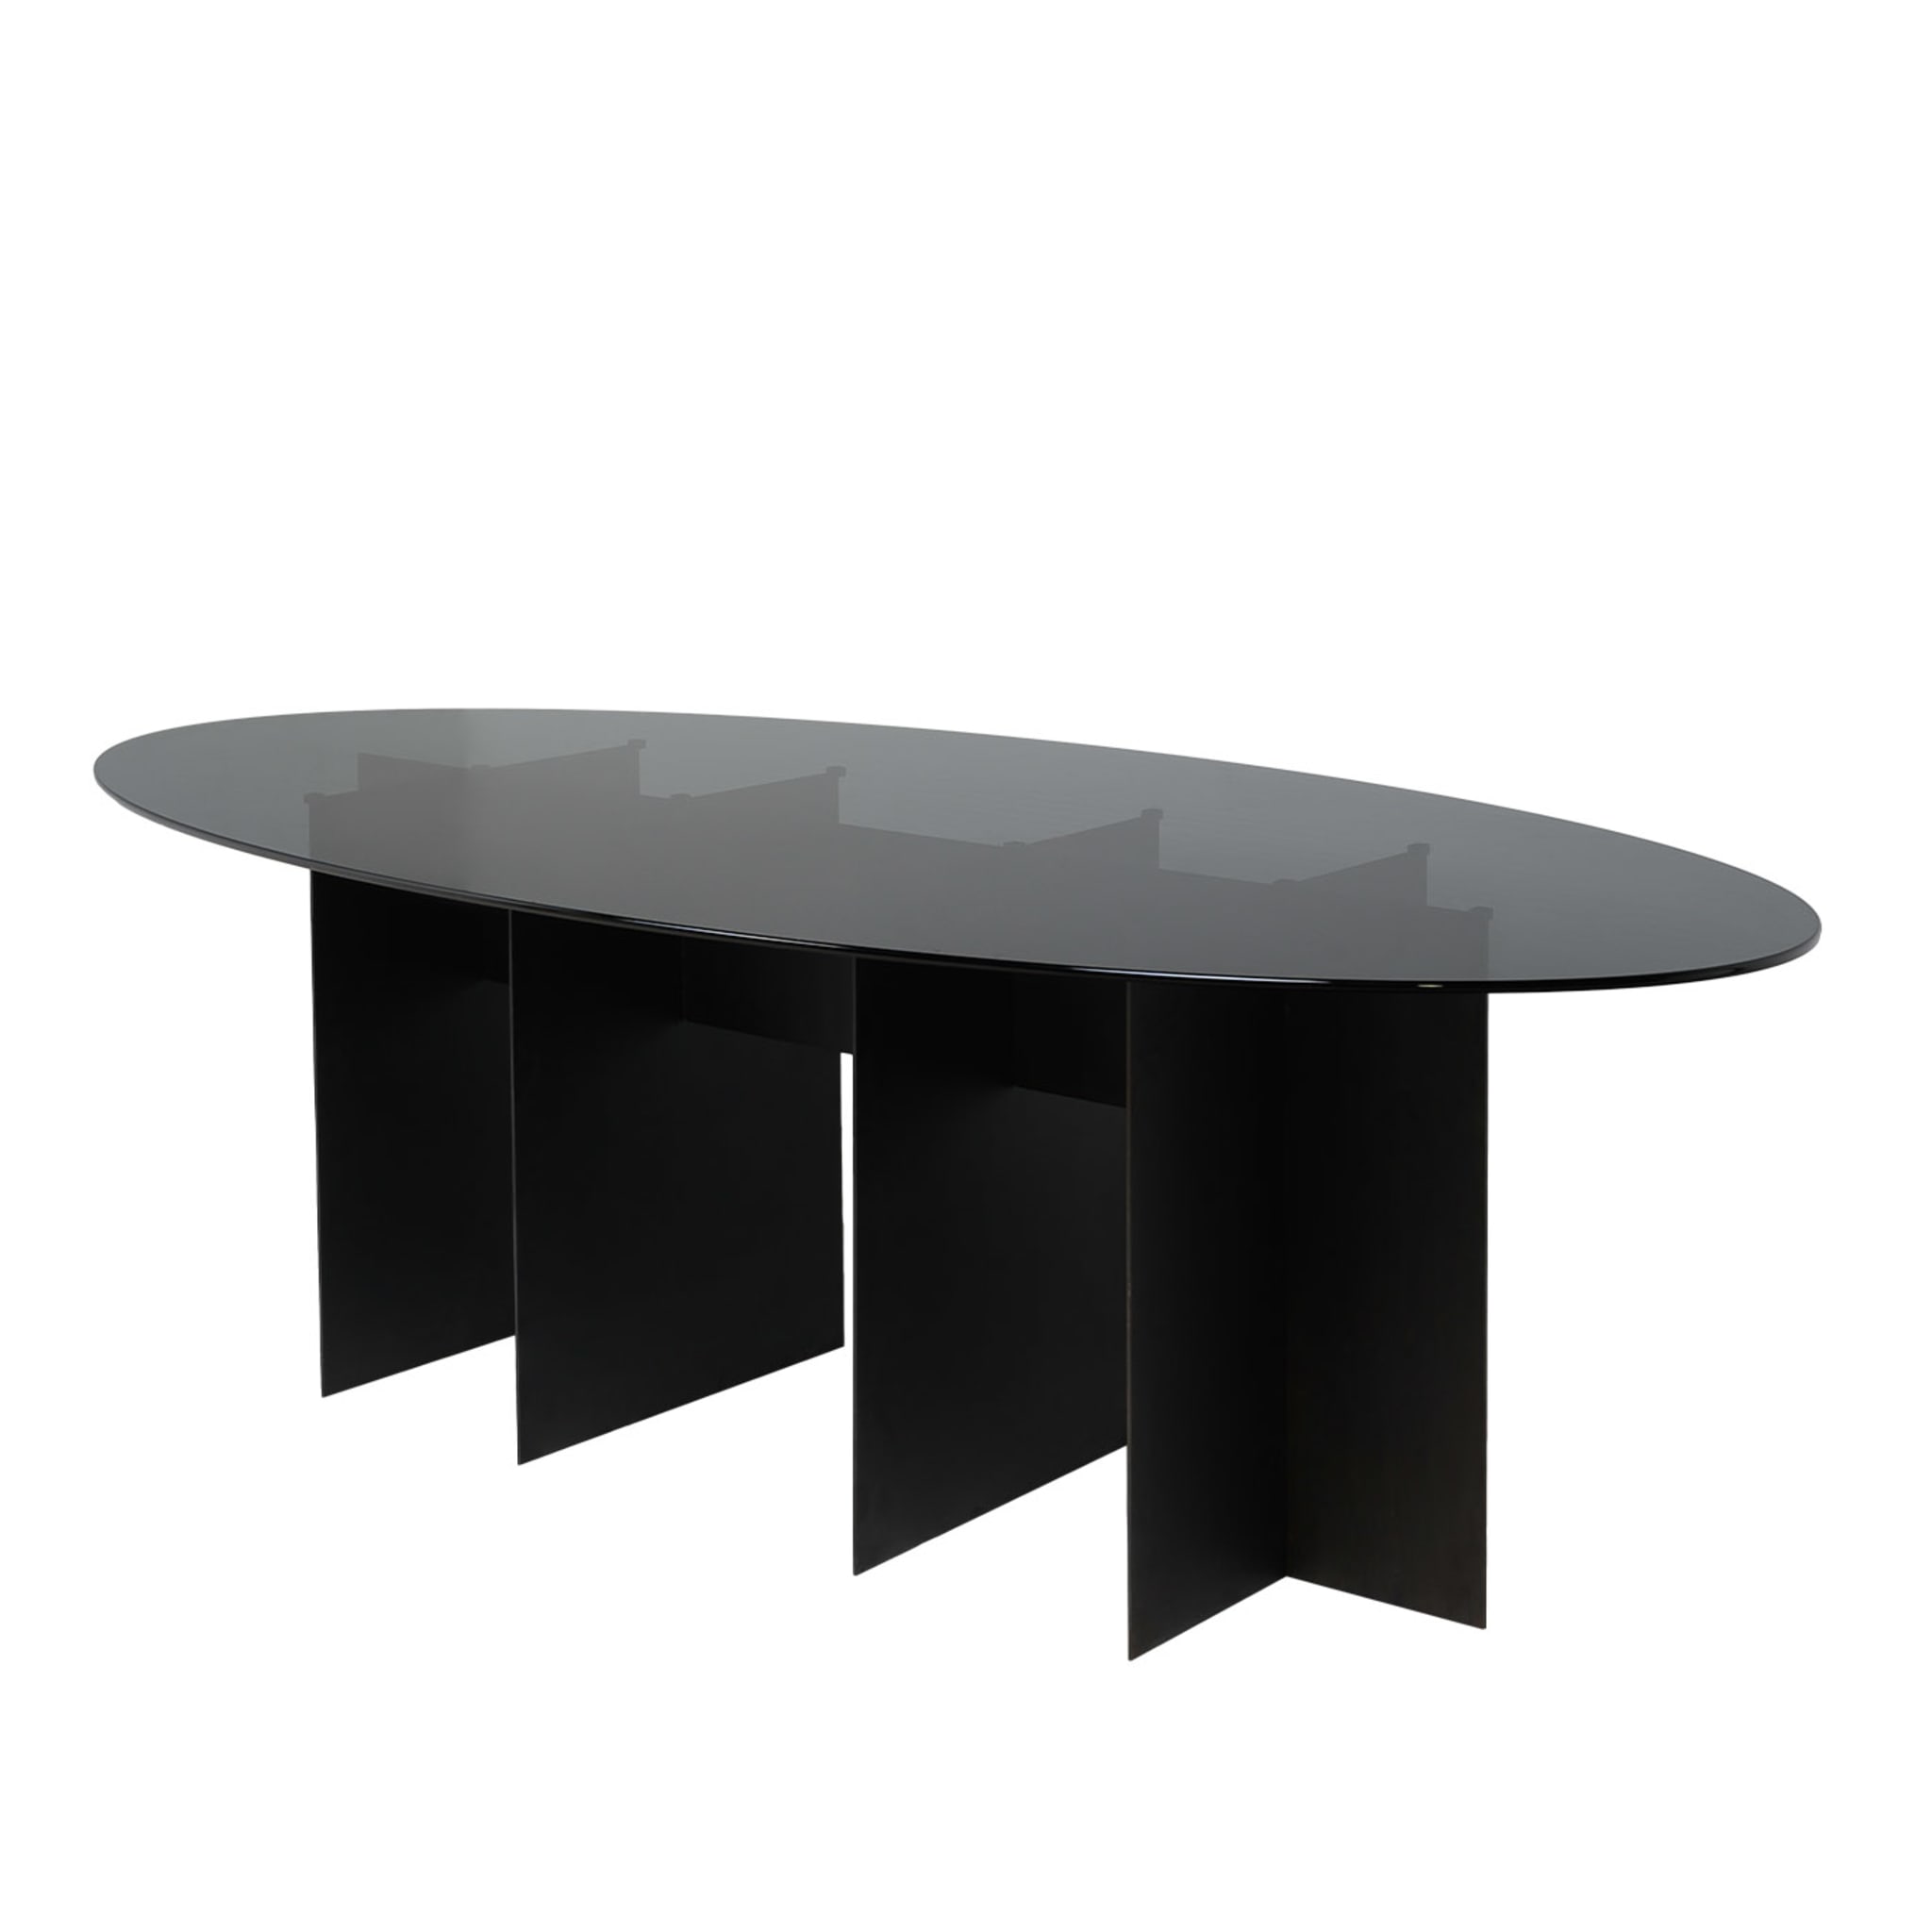 Roy Oval Black Dining Table by Filippo Montaina - Alternative view 3